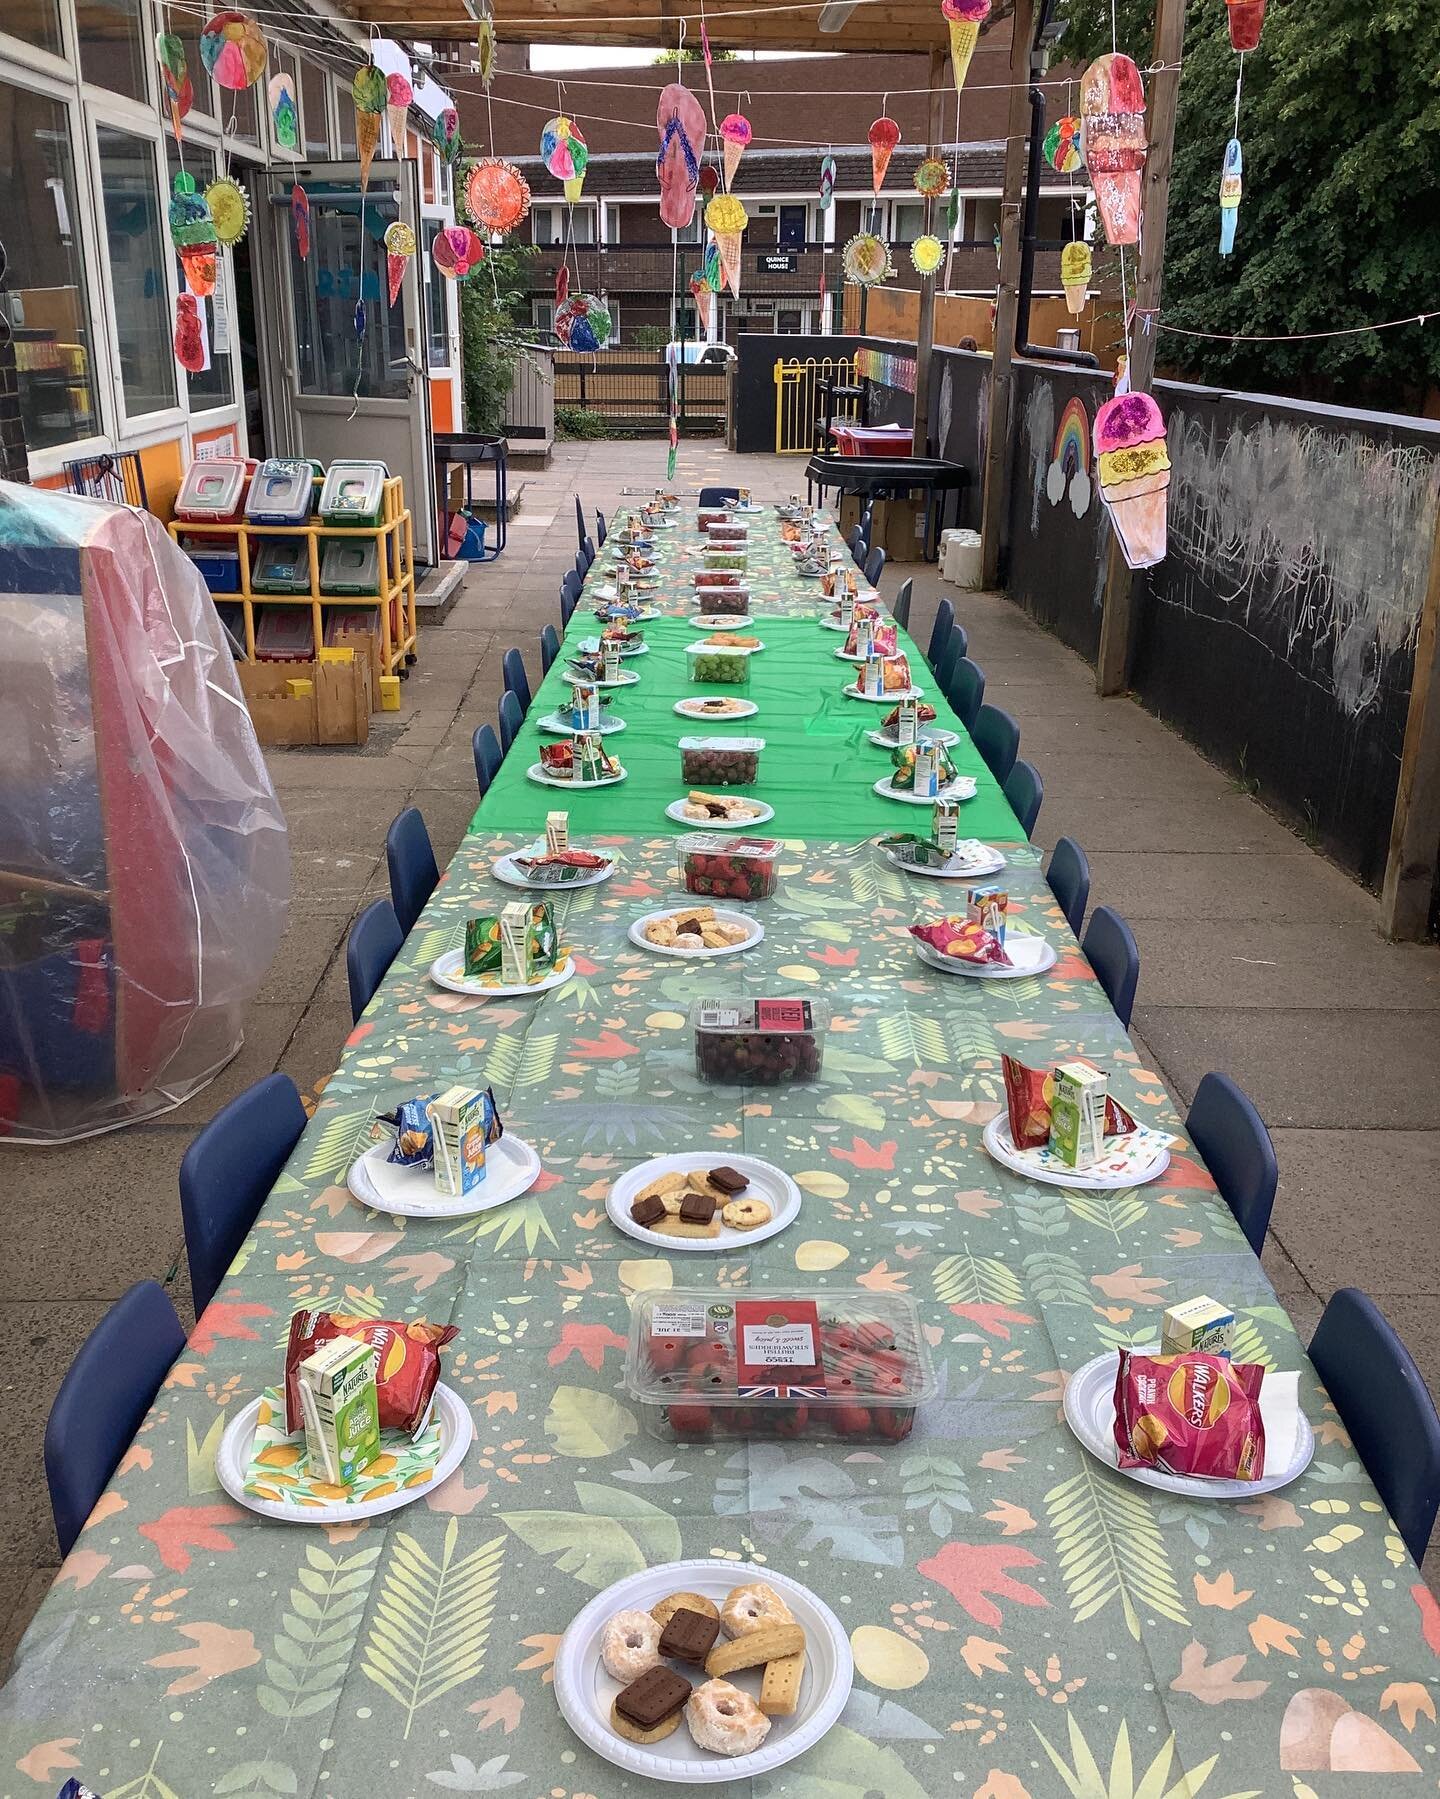 And just like that, it&rsquo;s the end of year party. Bye bye, Reception, what a year we&rsquo;ve had! #eyfs #reception